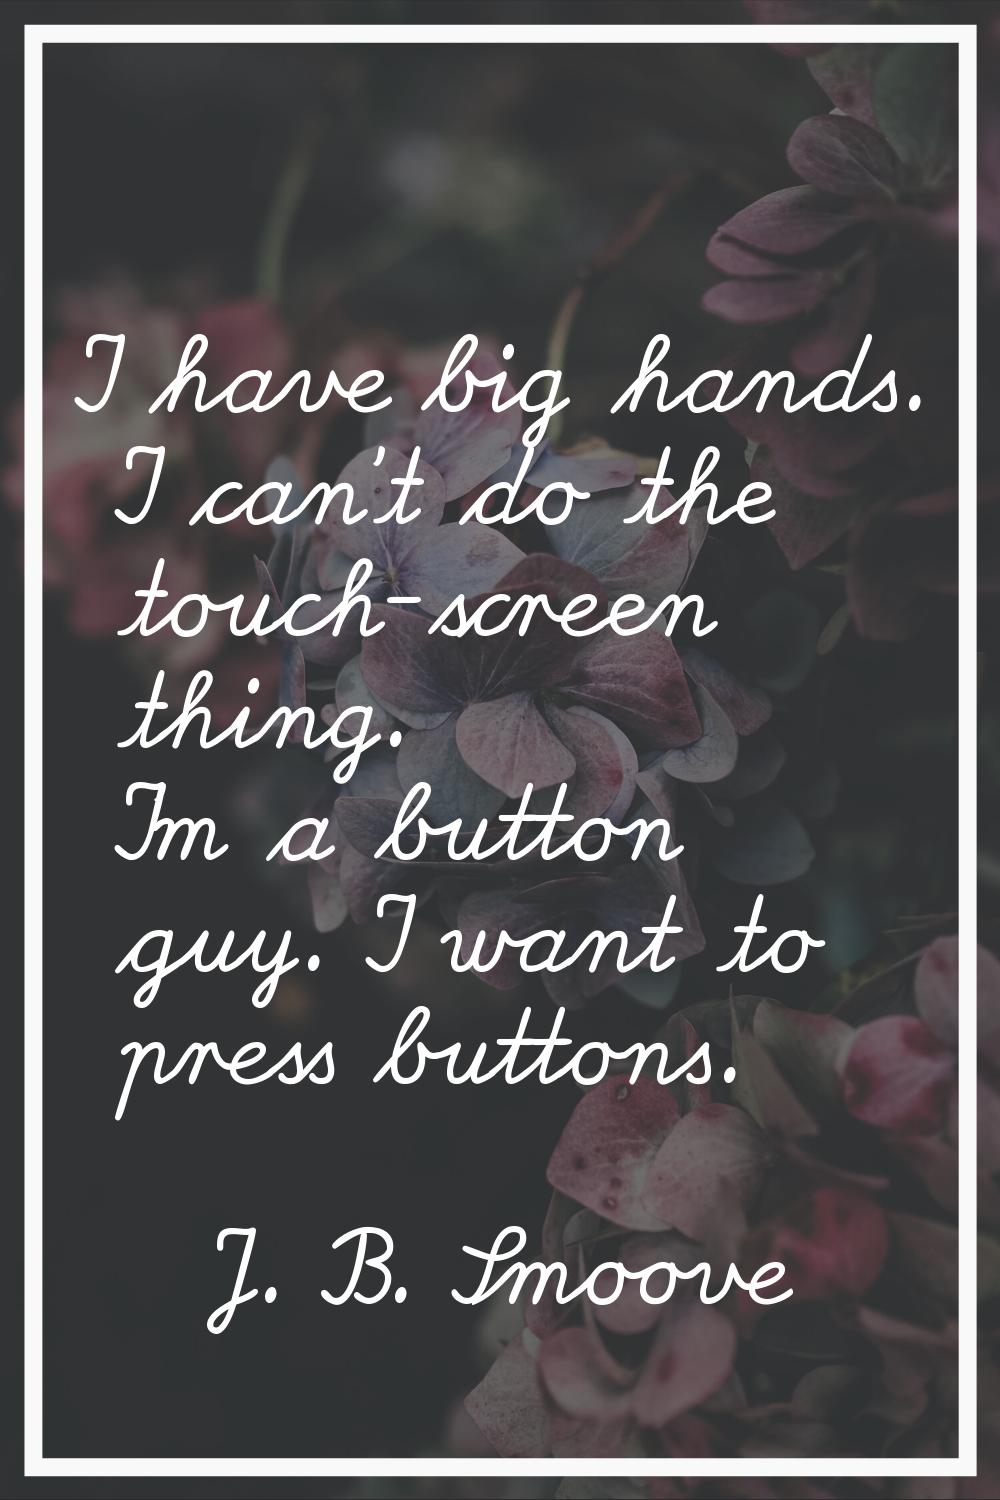 I have big hands. I can't do the touch-screen thing. I'm a button guy. I want to press buttons.